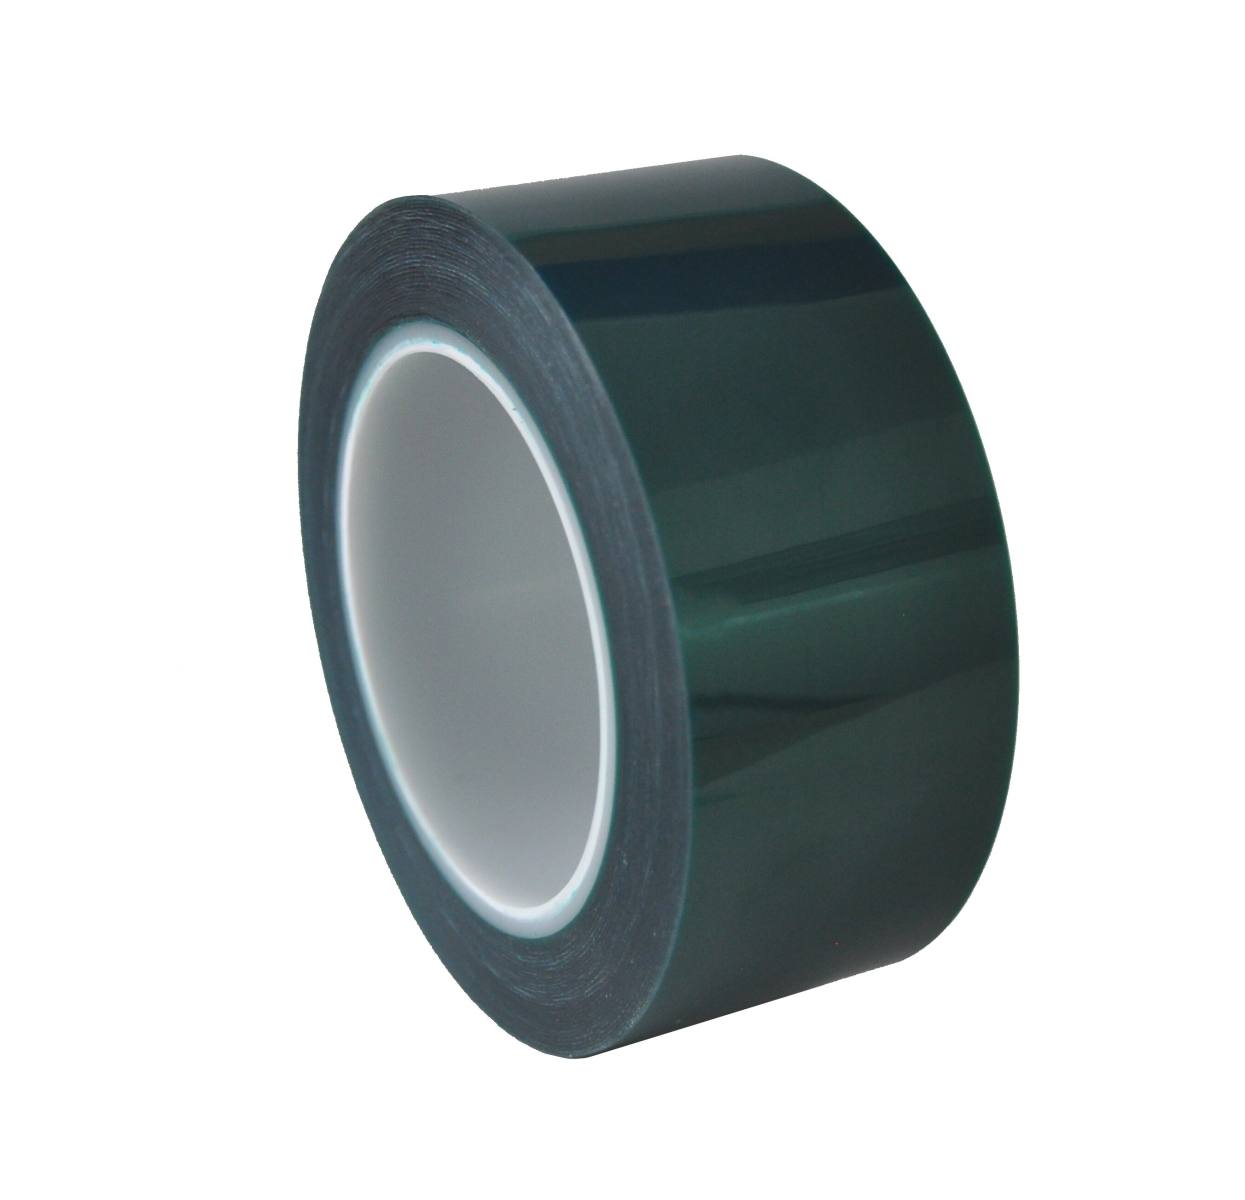 S-K-S 208G polyester adhesive tape, 100mmx66m, green